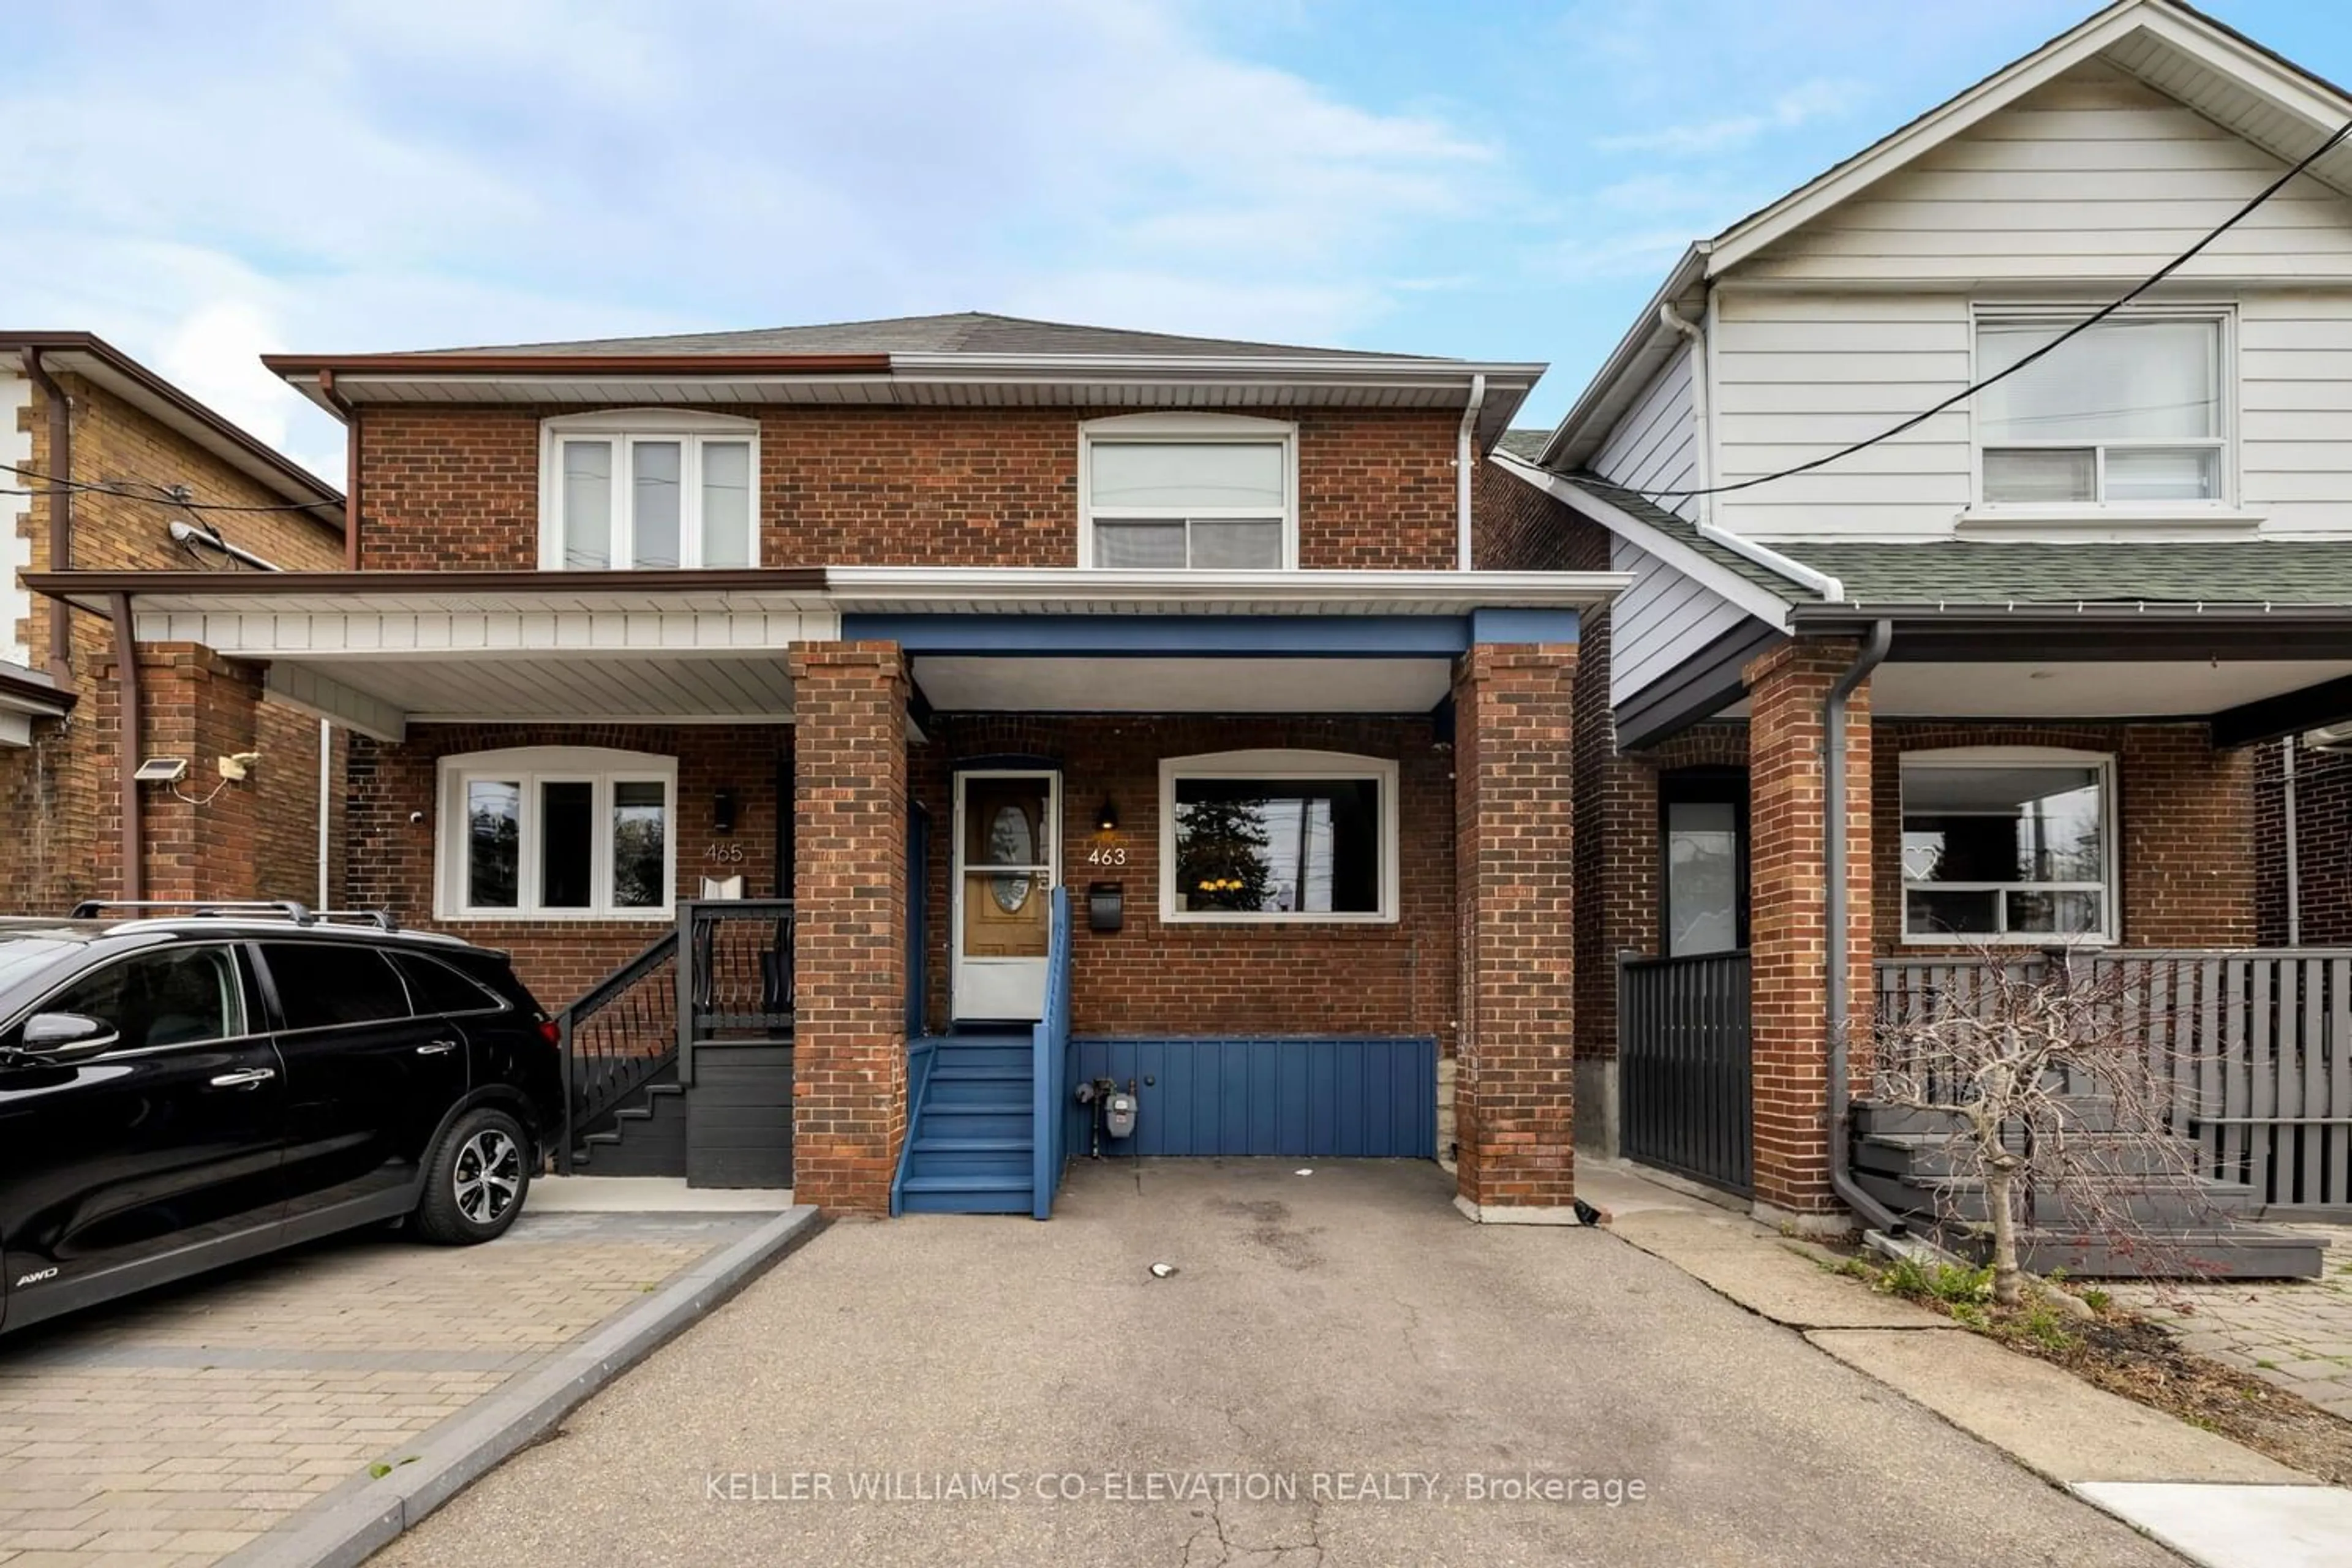 Home with brick exterior material for 463 Jane St, Toronto Ontario M6S 4A1